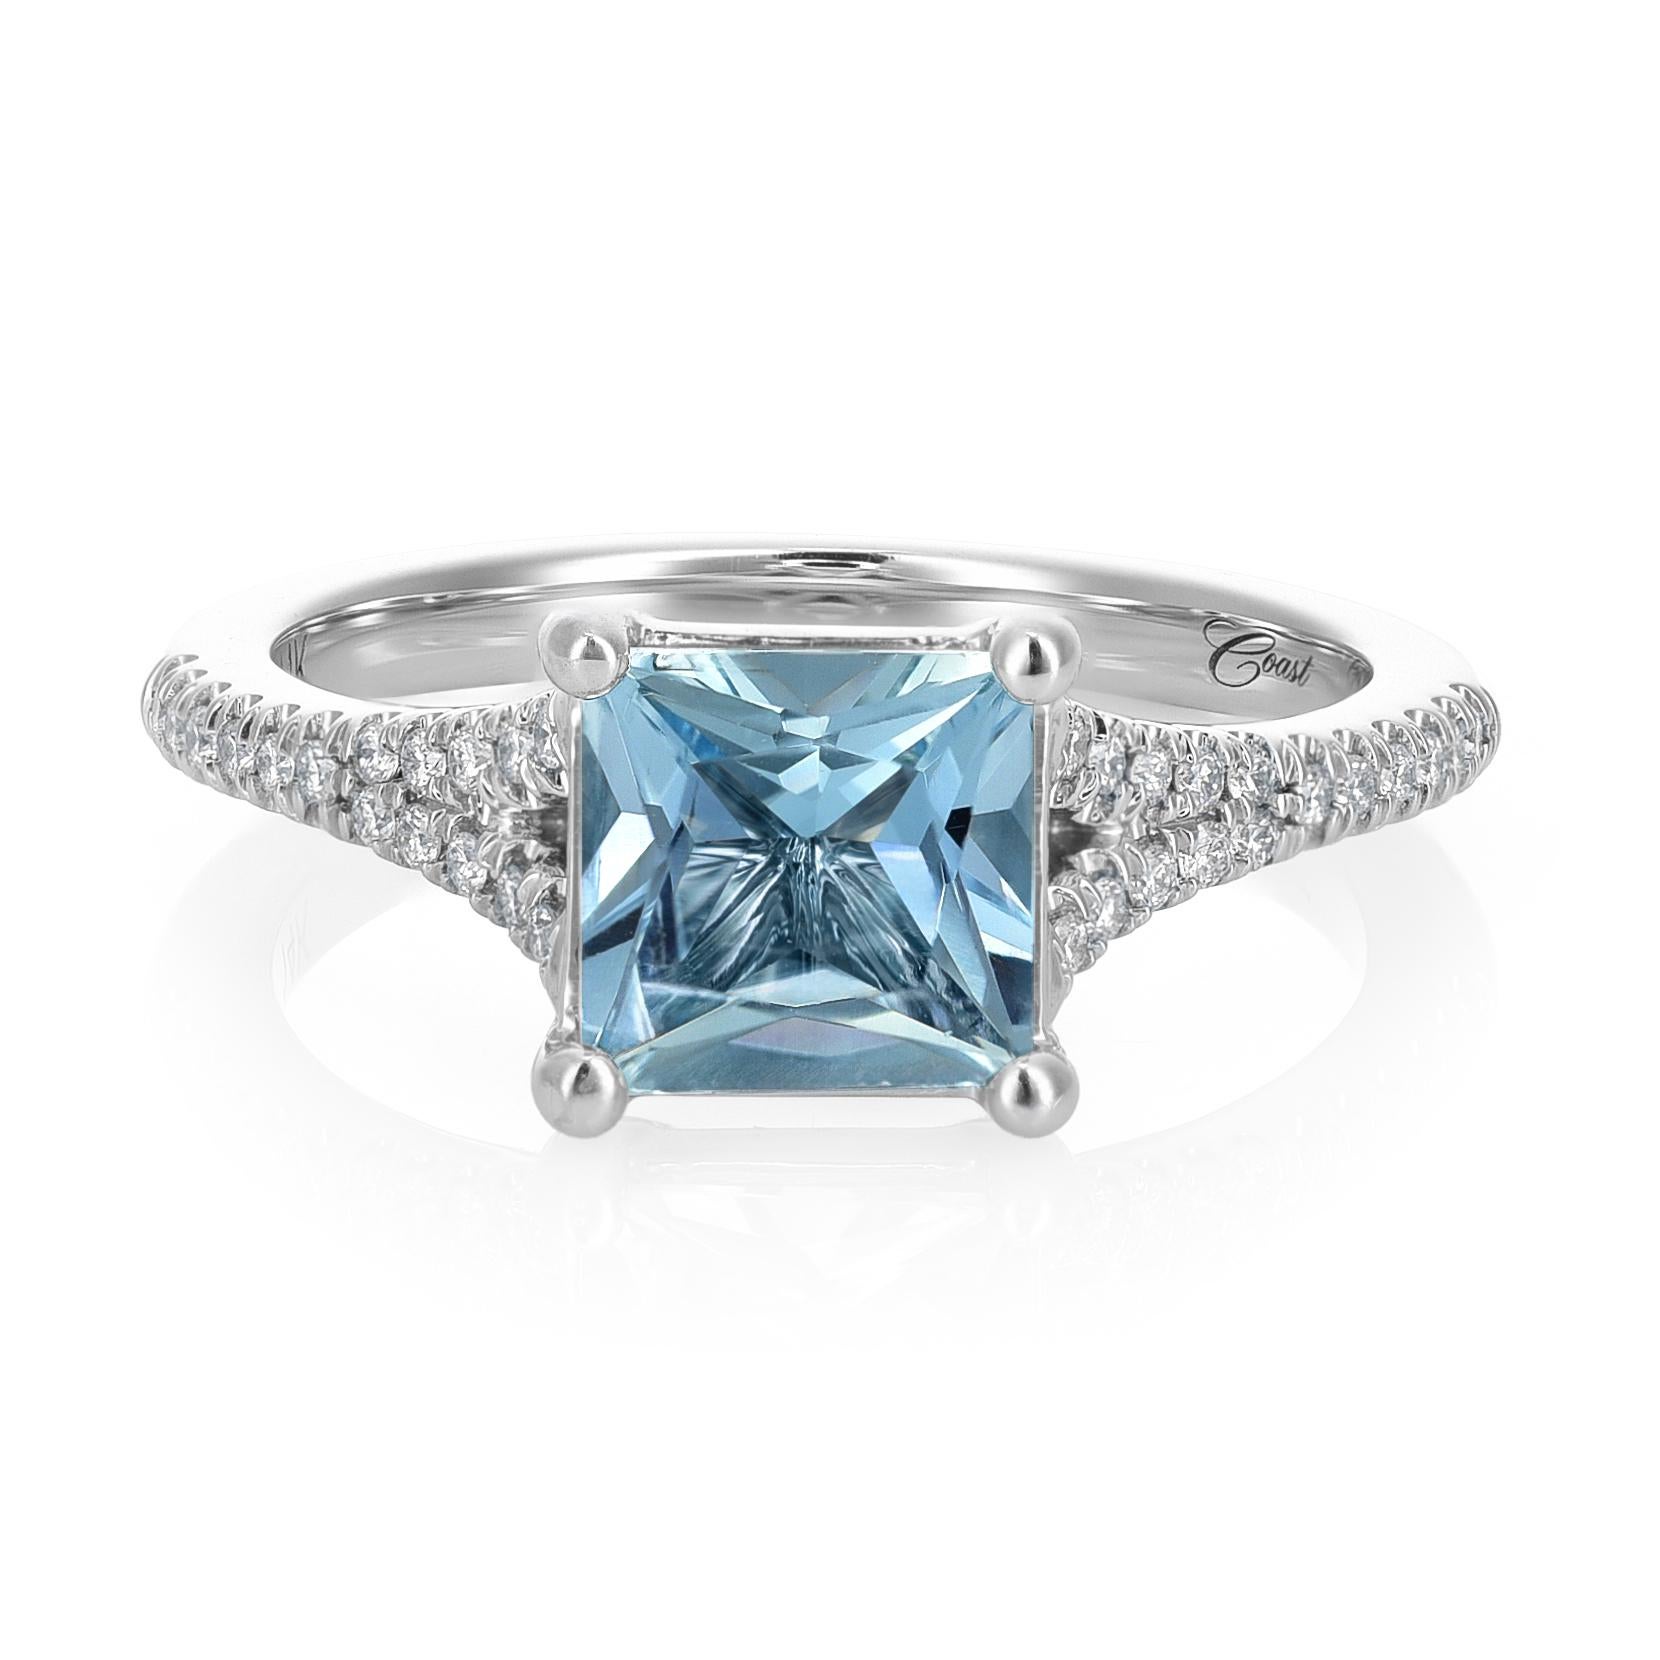 1.14 Carats Aquamarine Diamonds set in 14K White Ring In New Condition For Sale In Los Angeles, CA